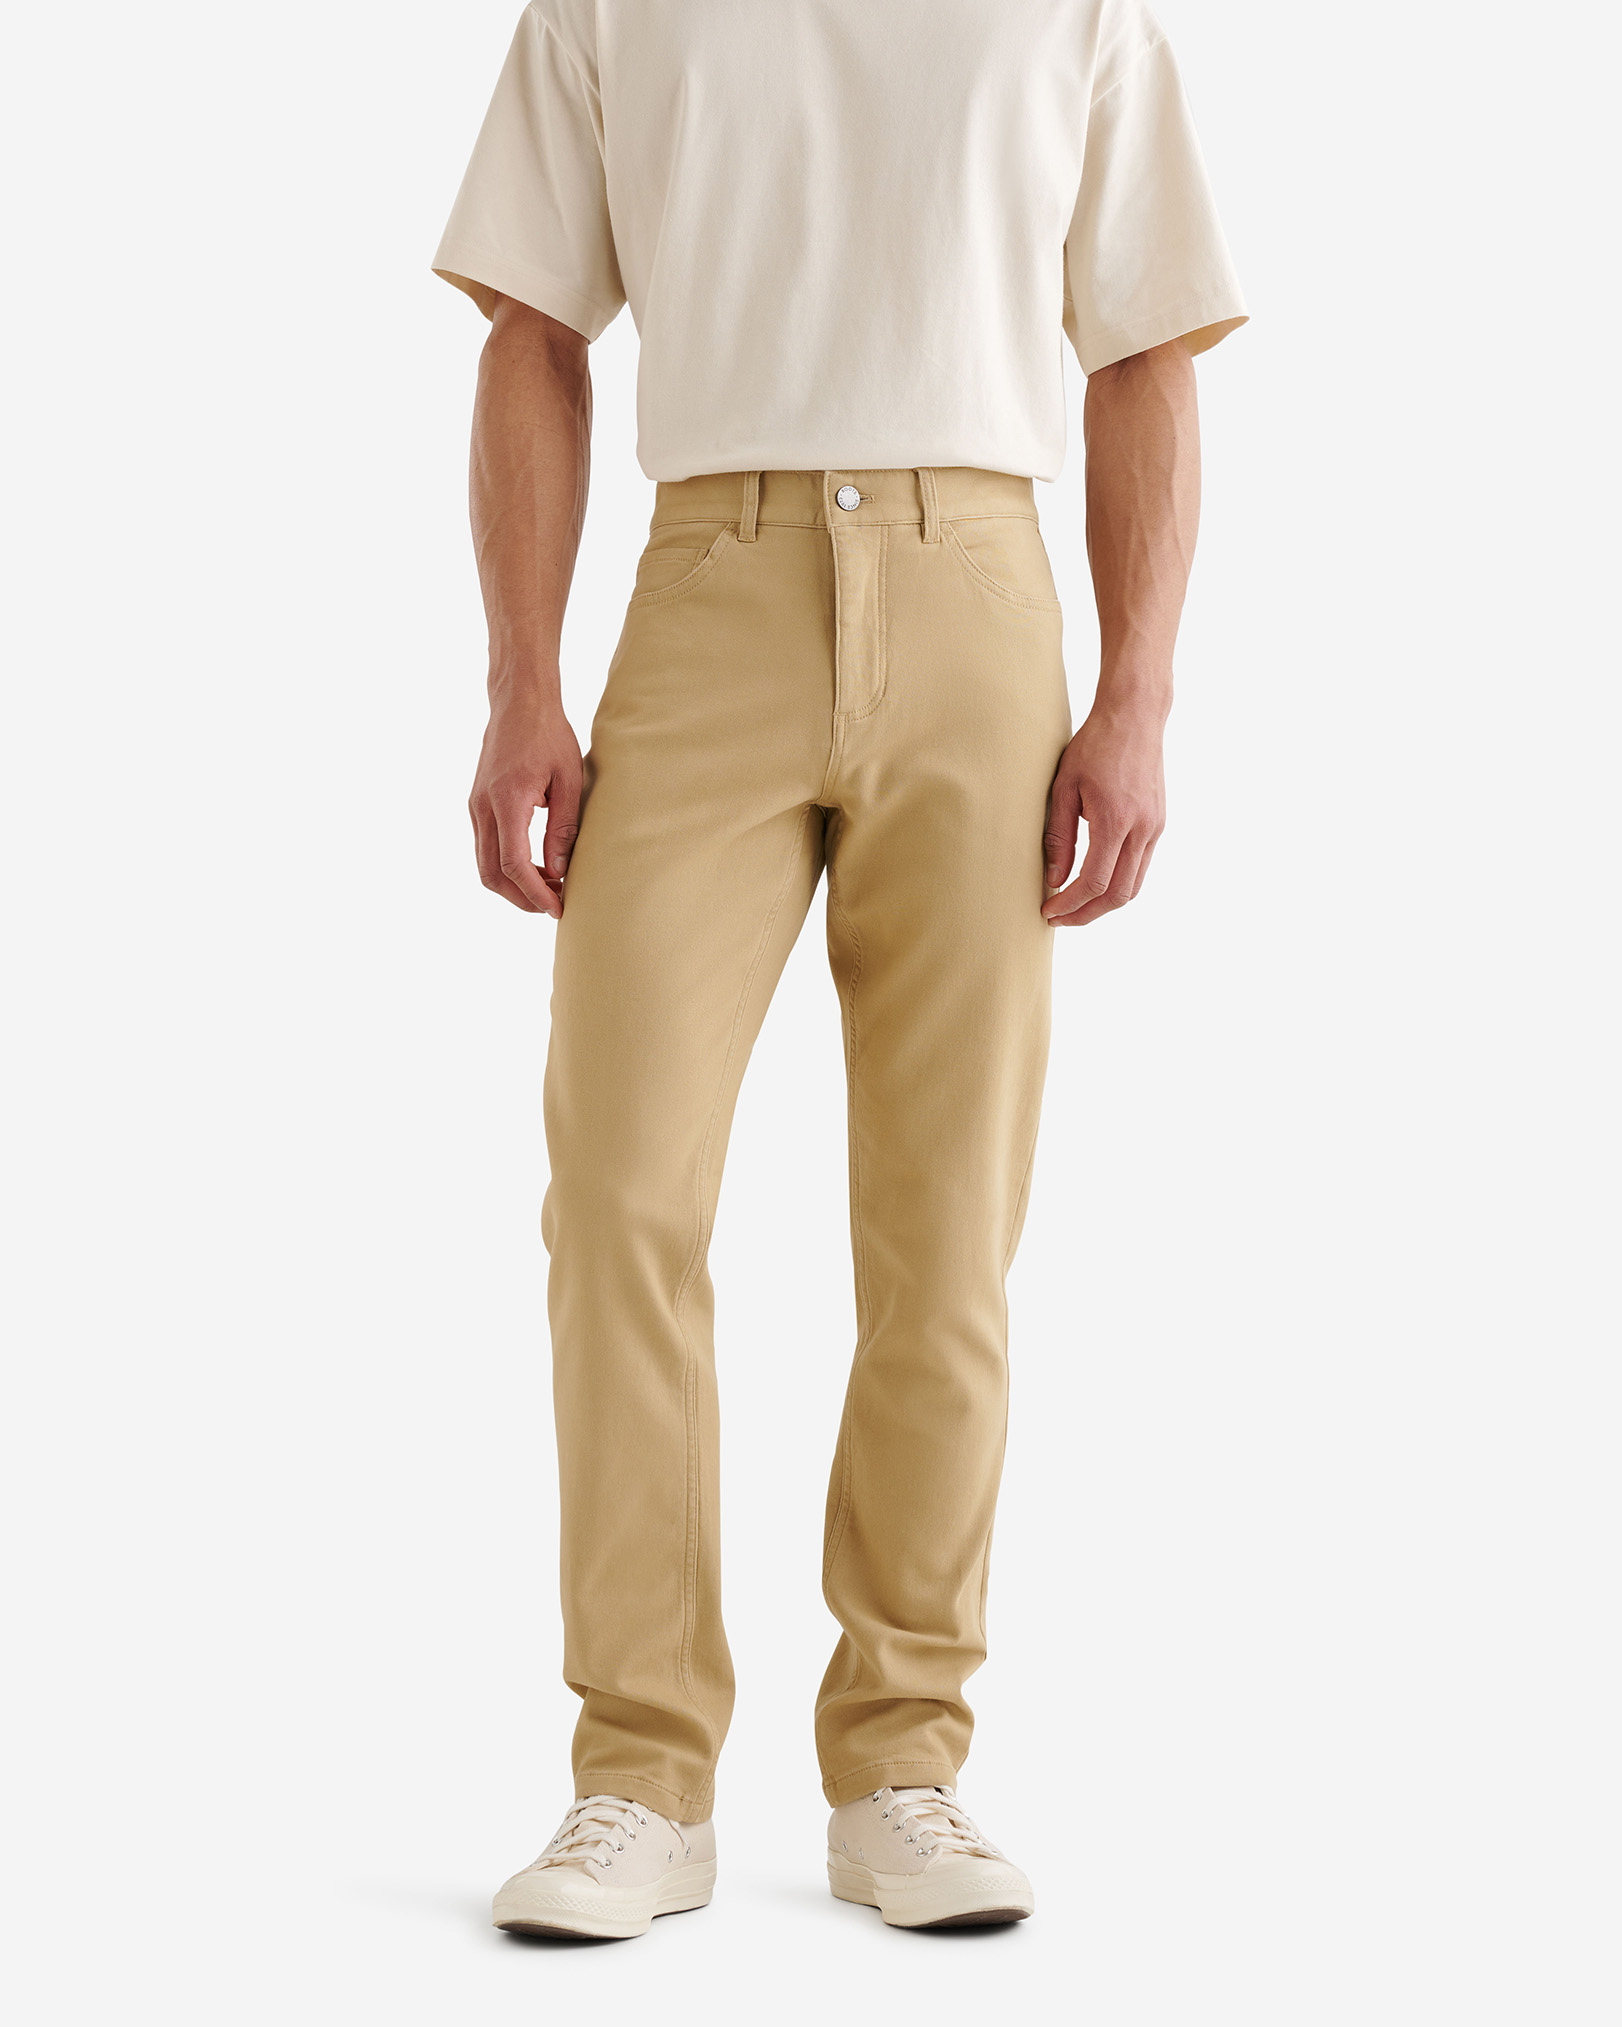 Roots Park Stretch 5 Pocket Pant in Incense